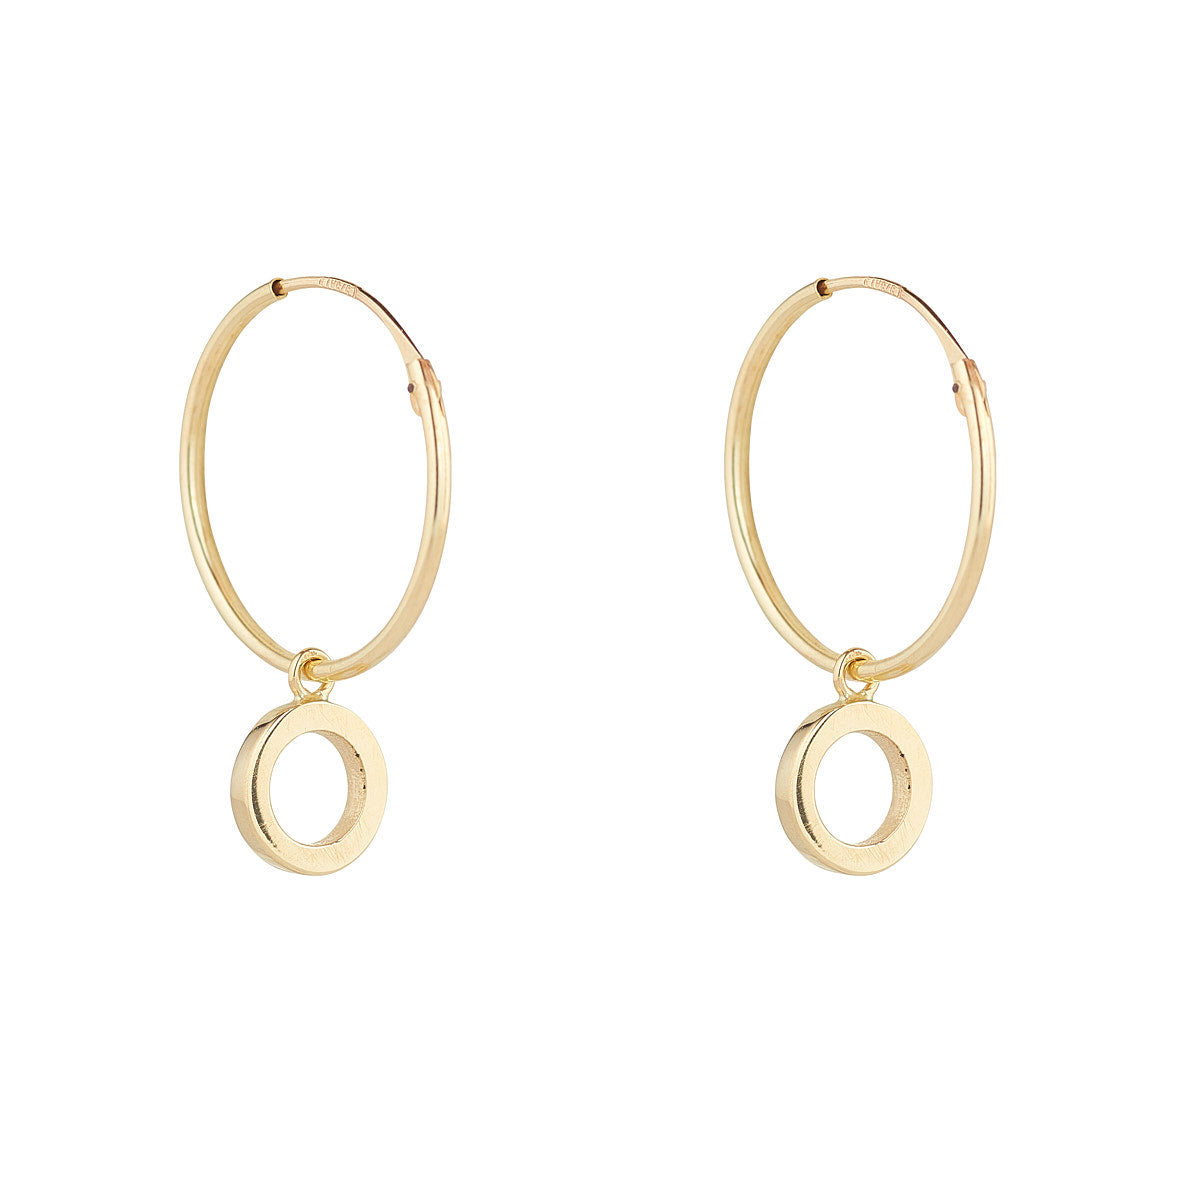 Ear Candy 9ct Gold Sleepers with Open Circle Charm - John Ross Jewellers